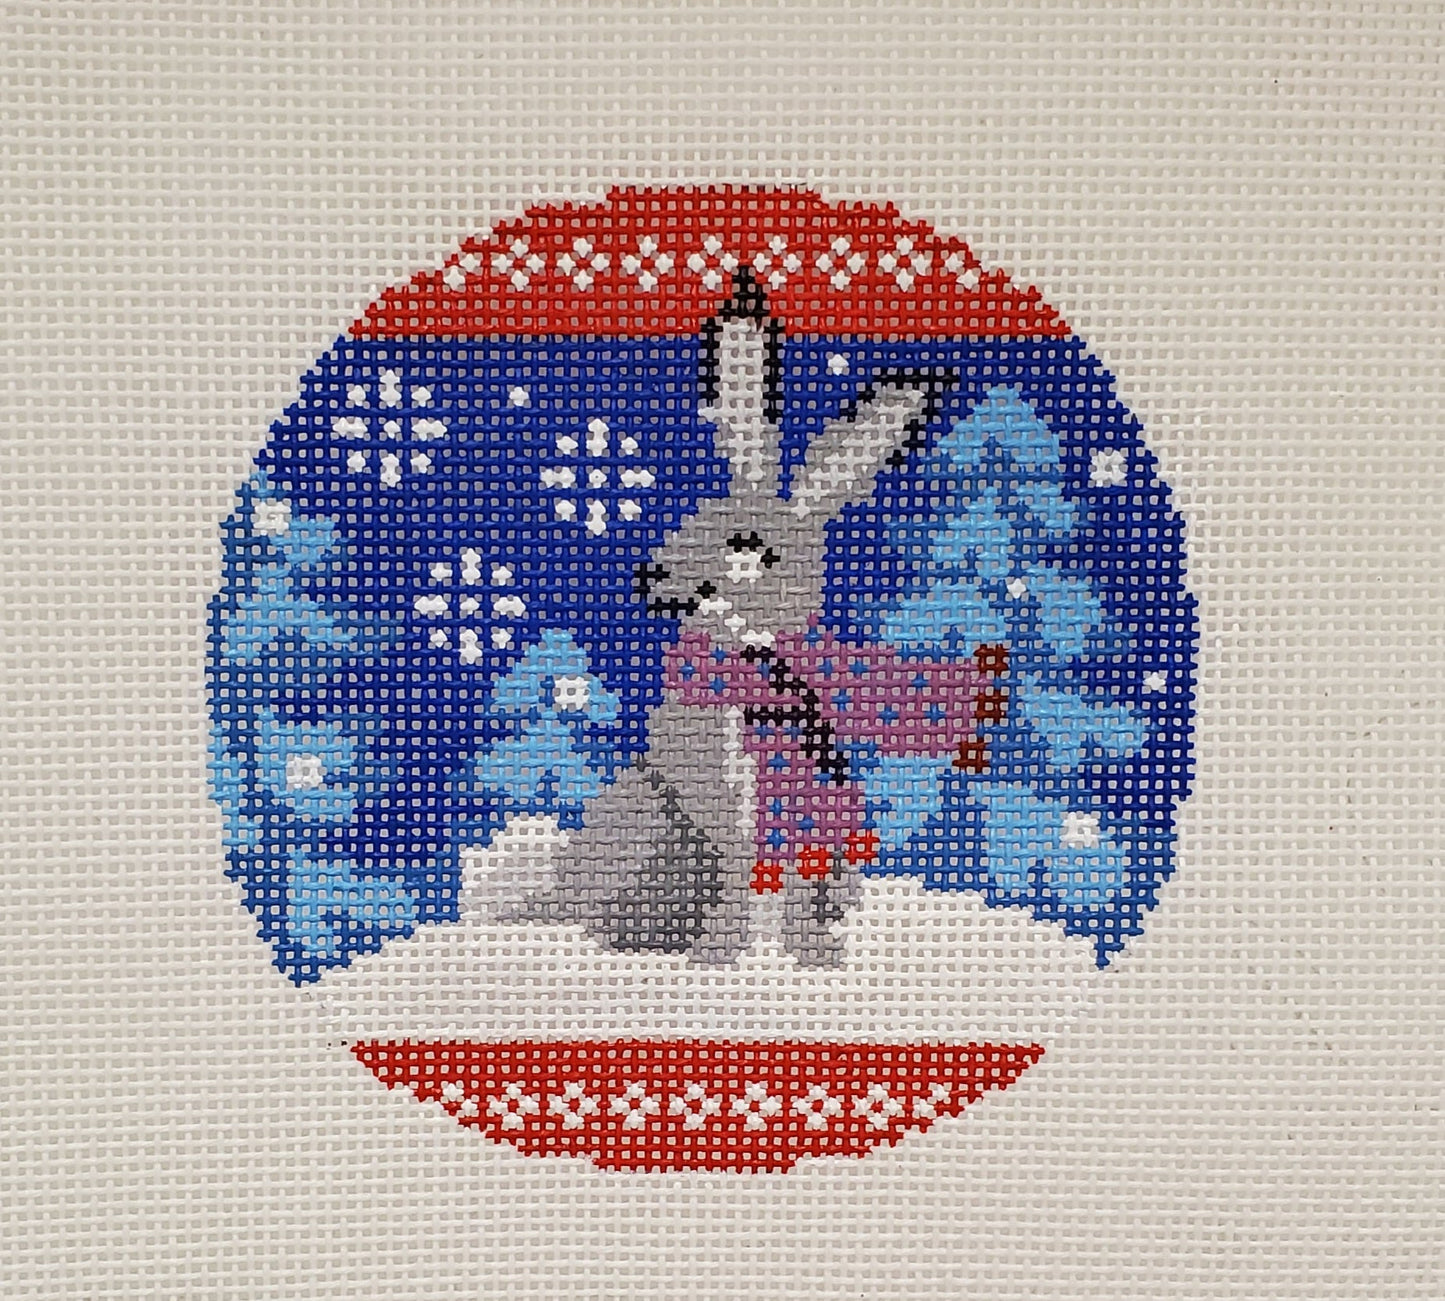 Rabbit in Blue Ornament - The Flying Needles